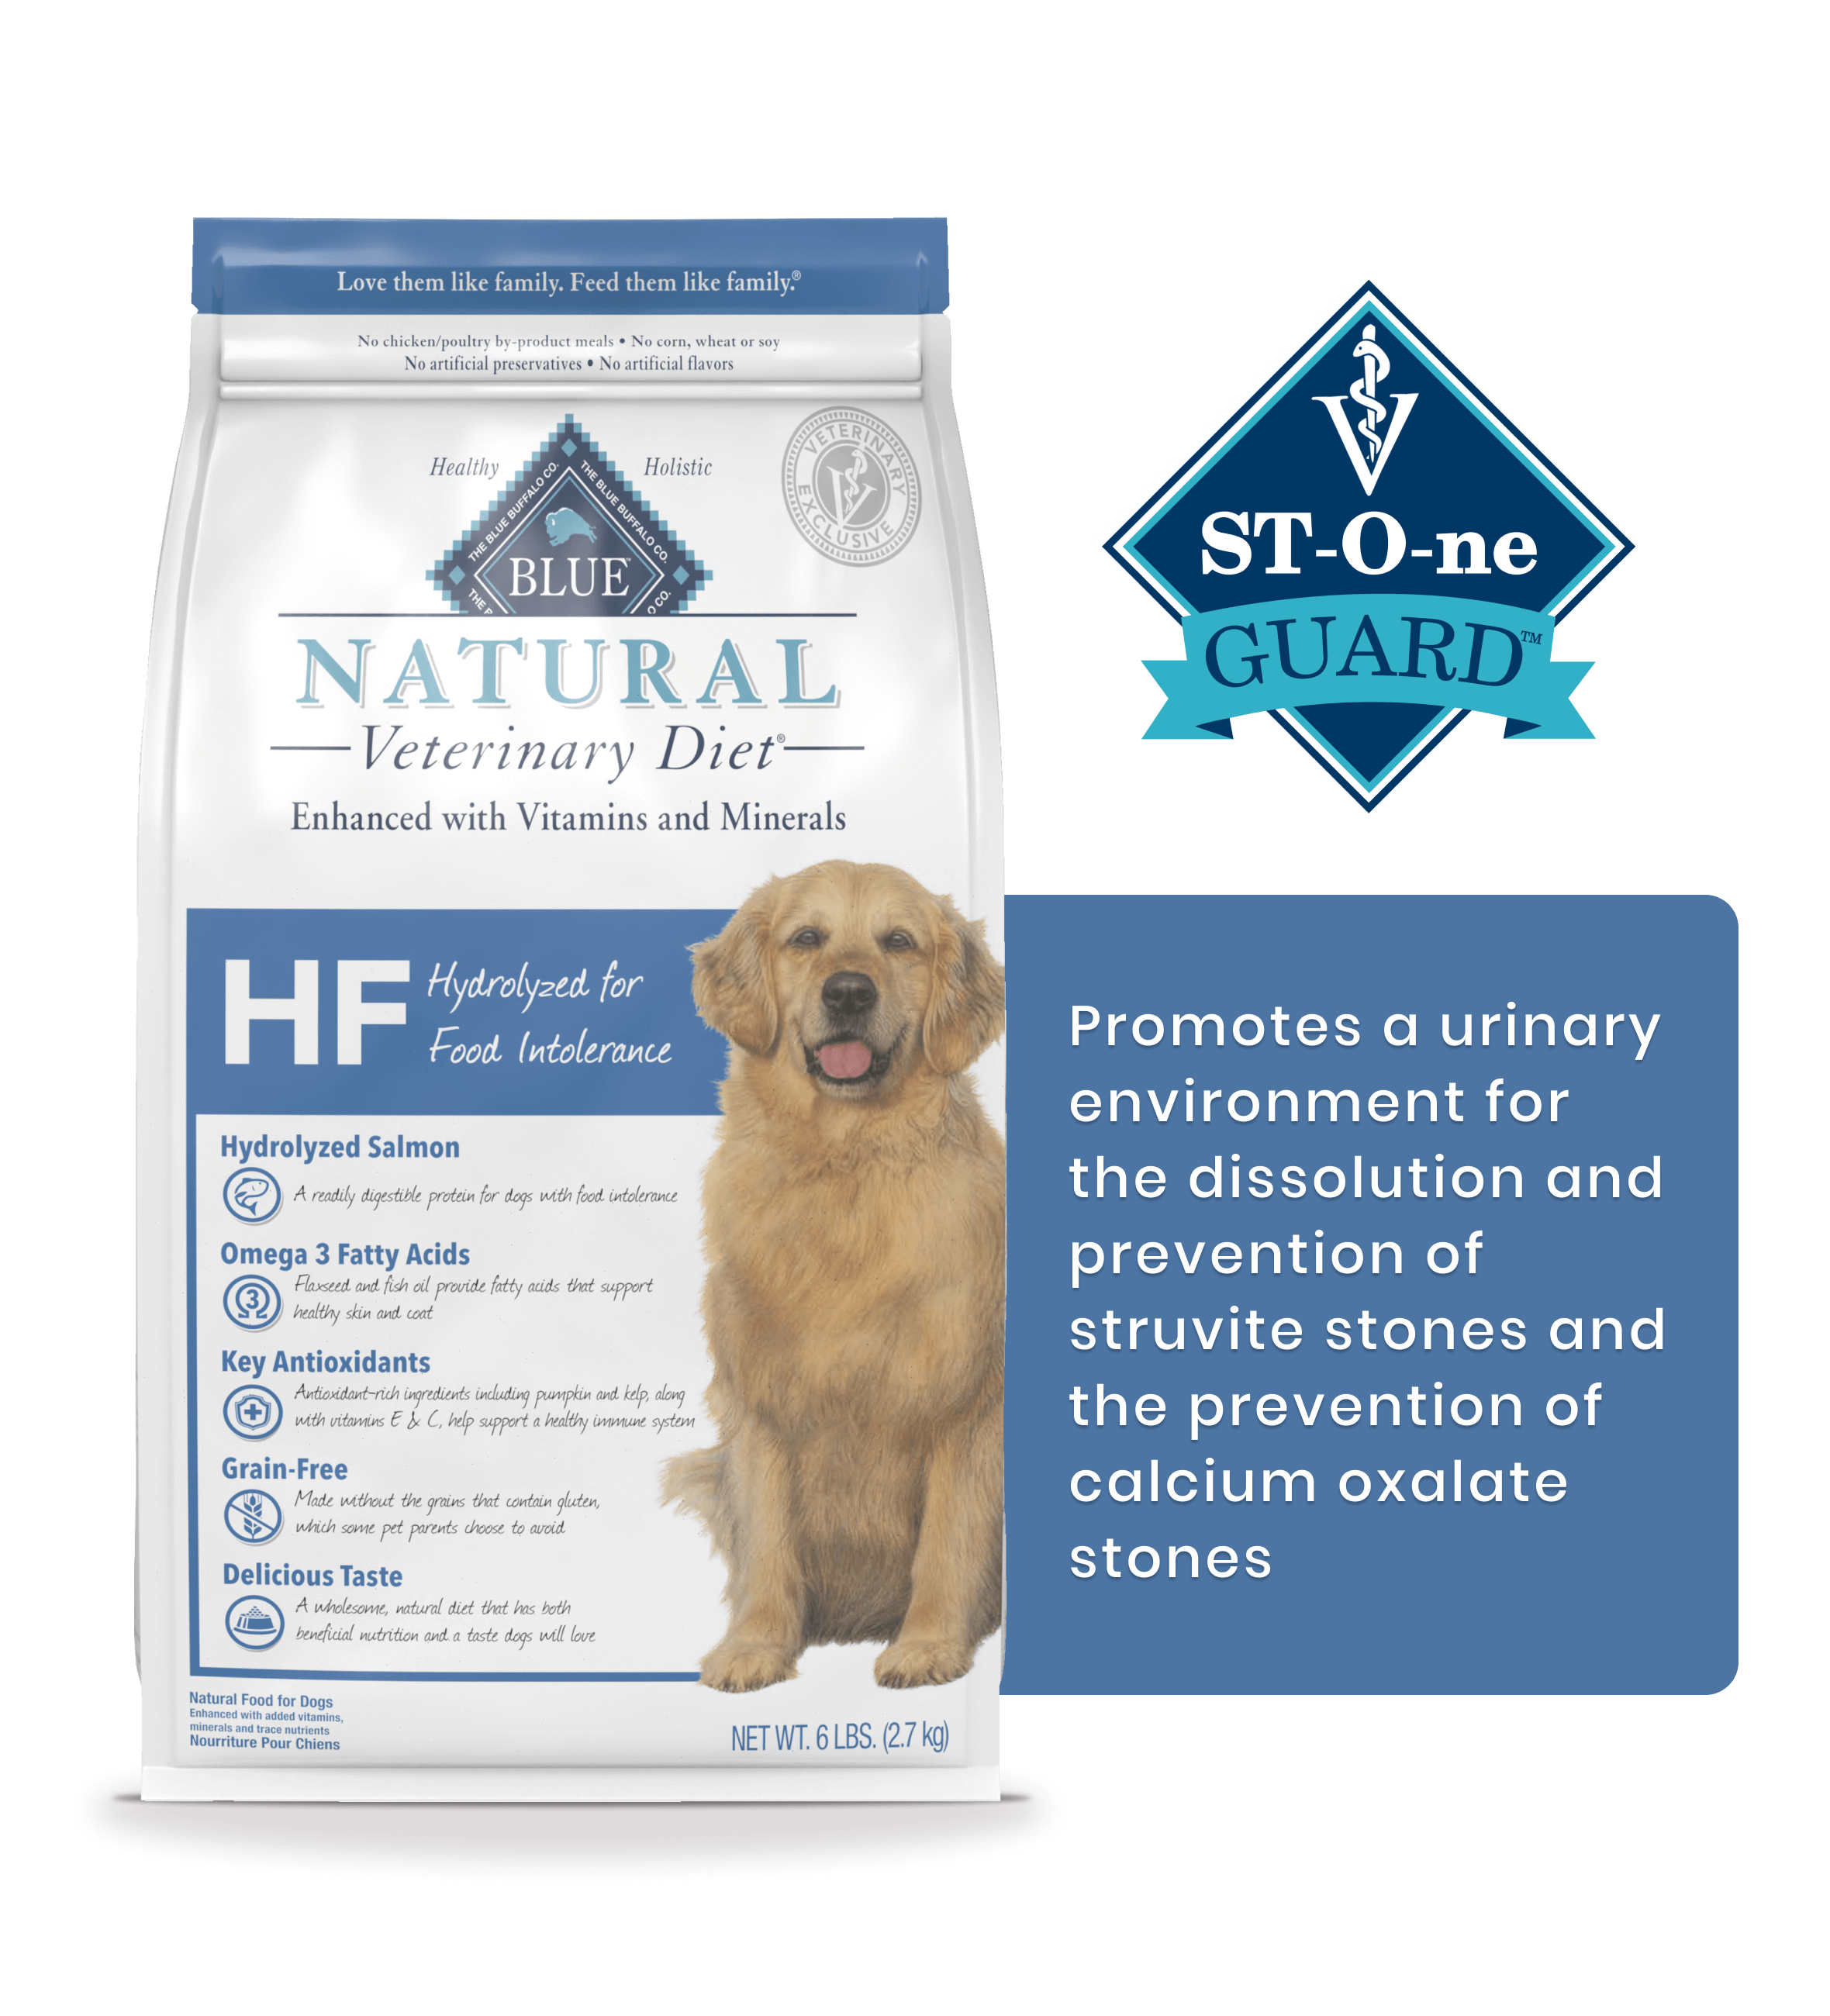 blue natural veterinary diet hf hydrolyzed for food intolerance dog dry food